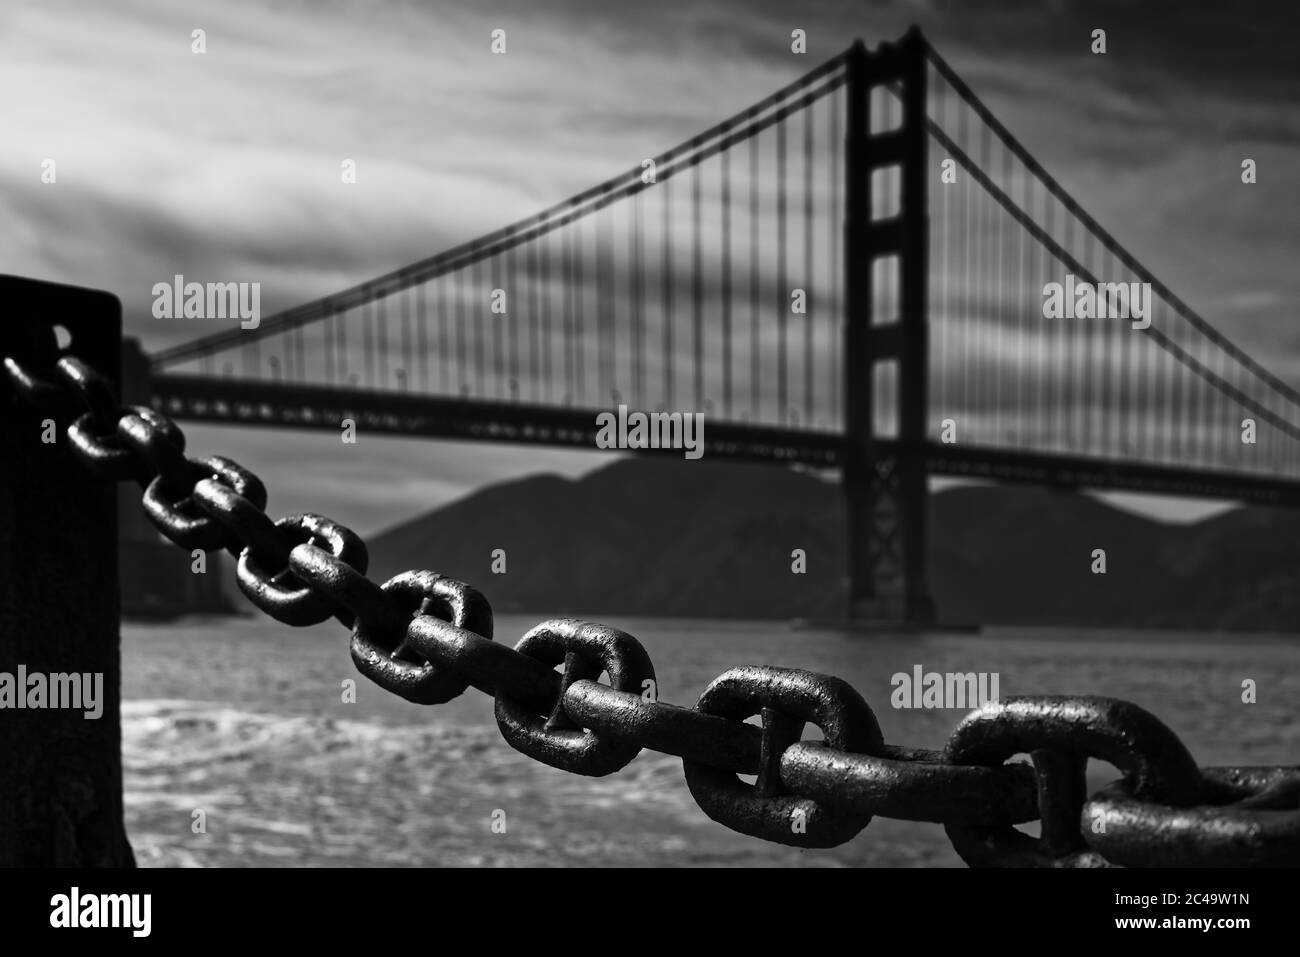 The evening light was playing with a big chain, which is used as a fence. In background is the silhouette of the Golden Gate Bridge. Stock Photo